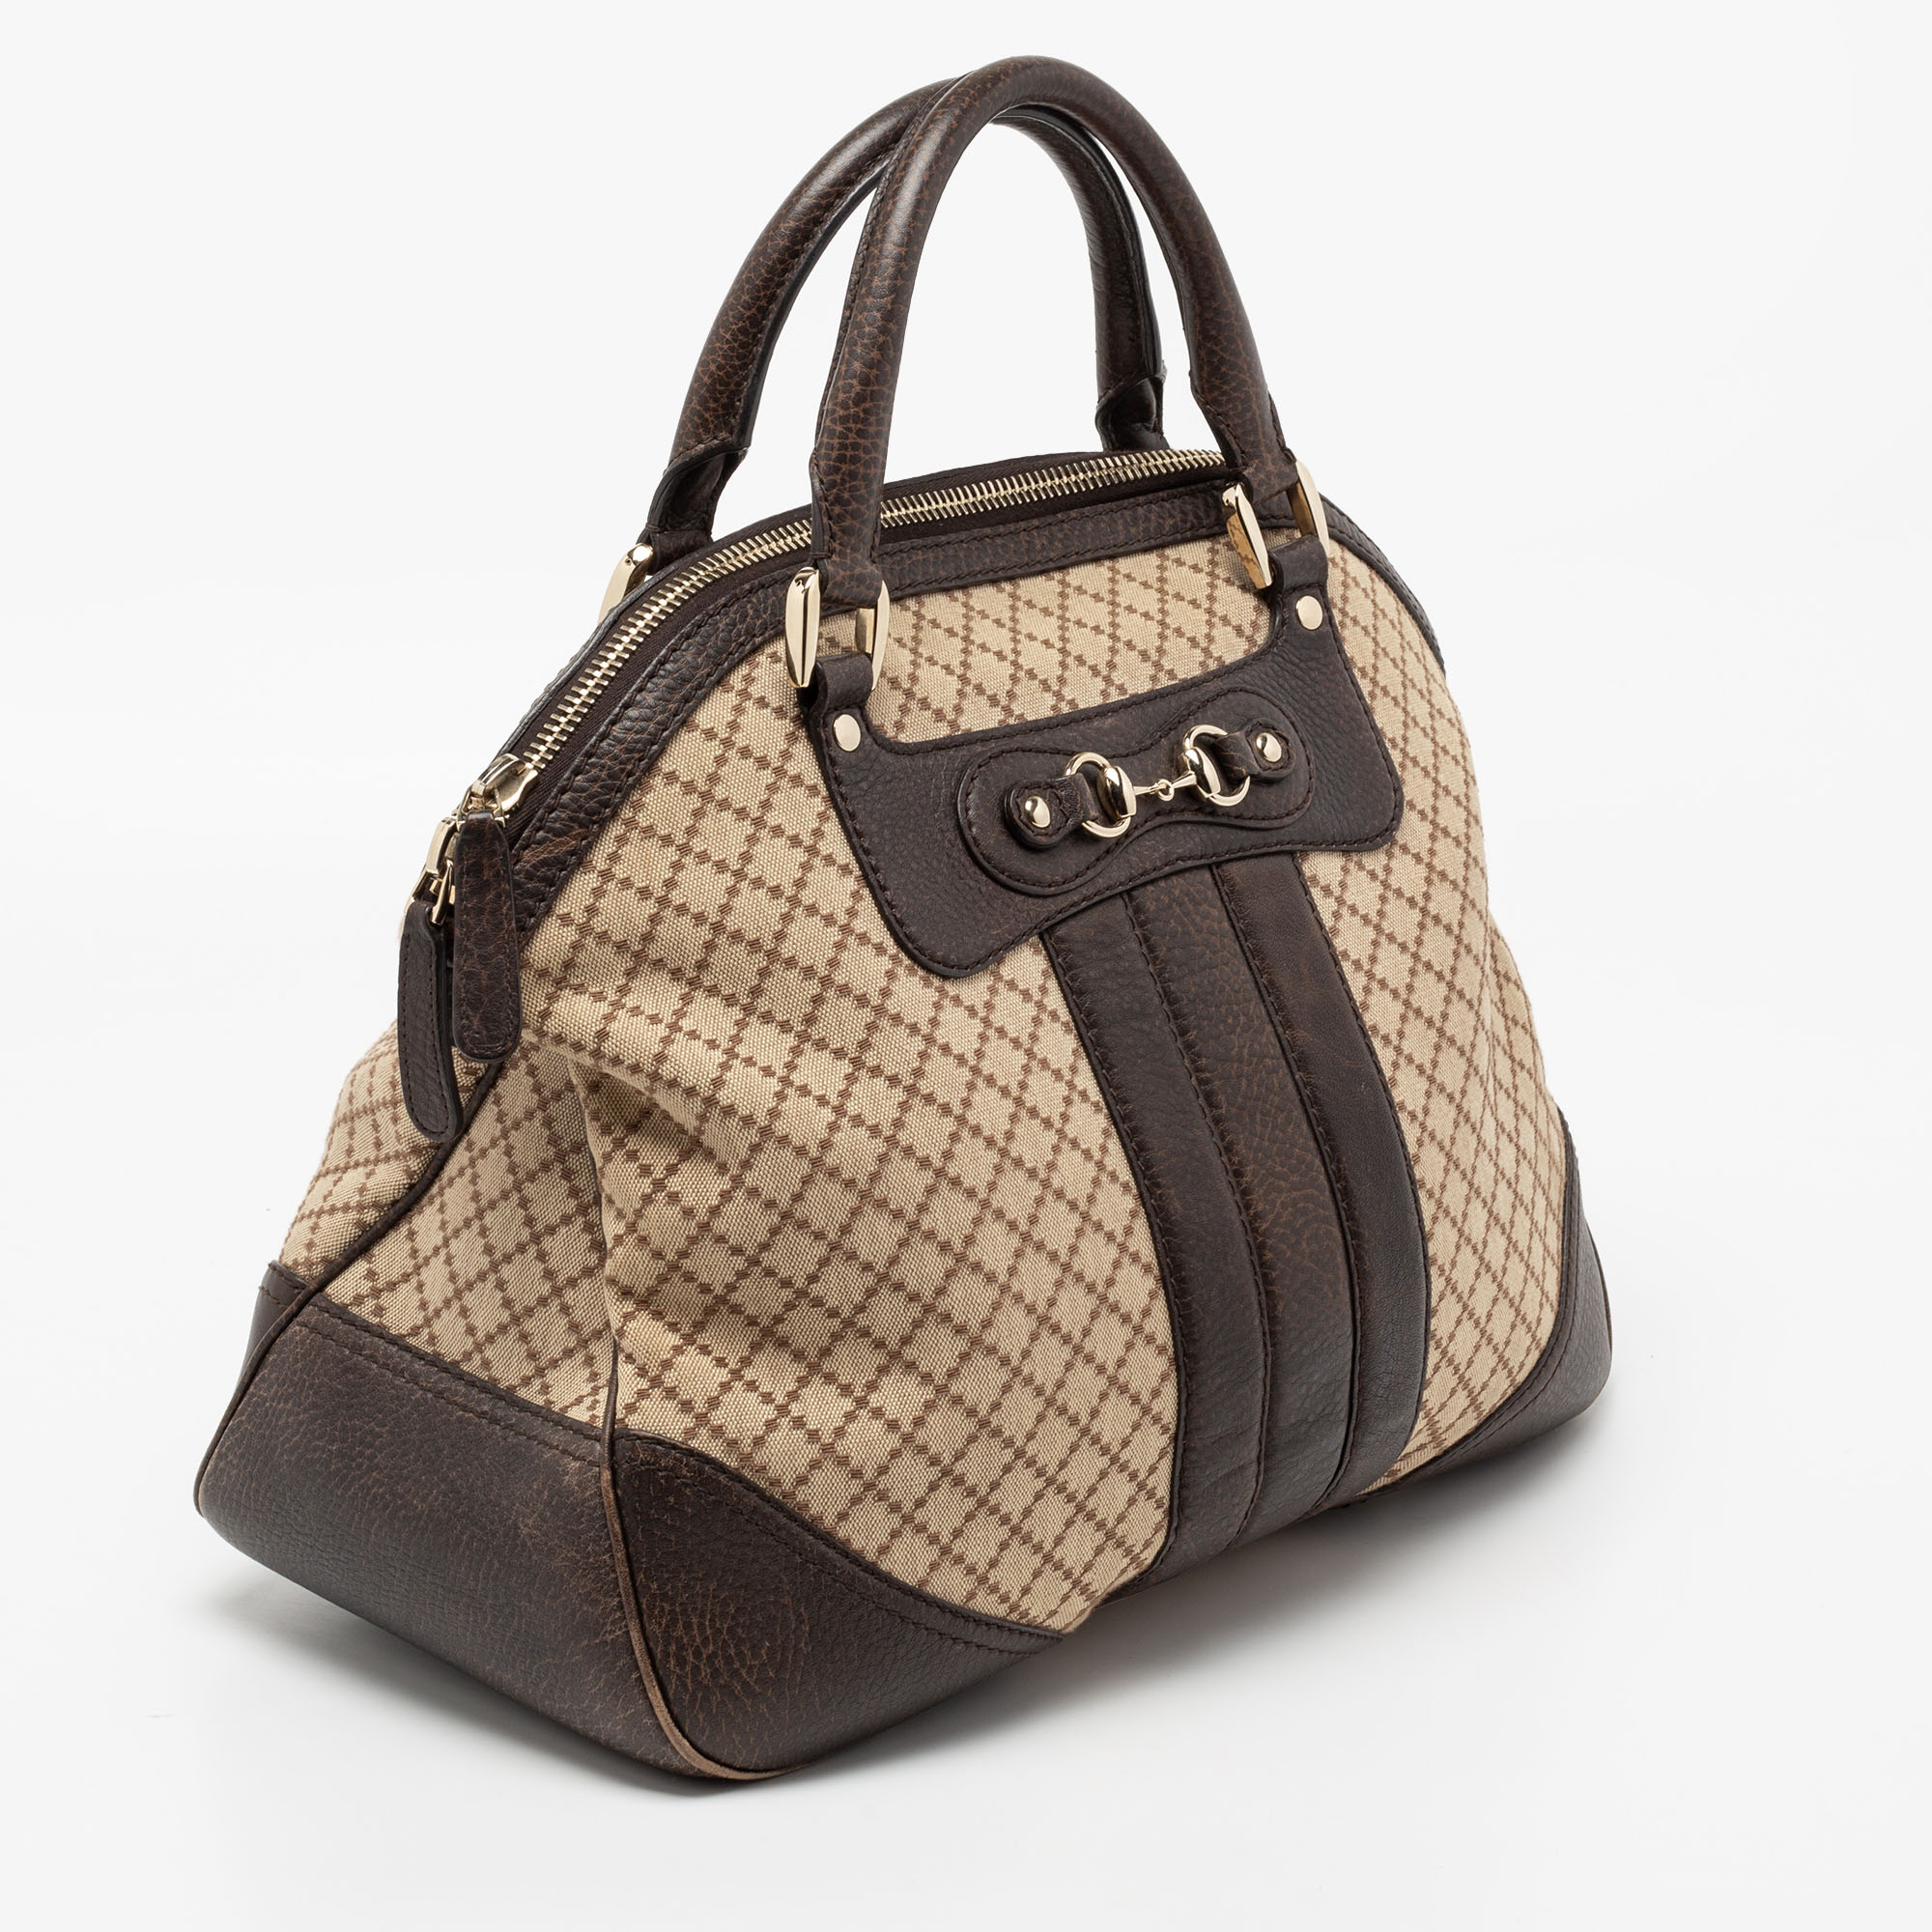 Gucci Beige/Brown Diamante Canvas And Leather Large Horsebit Catherine Satchel